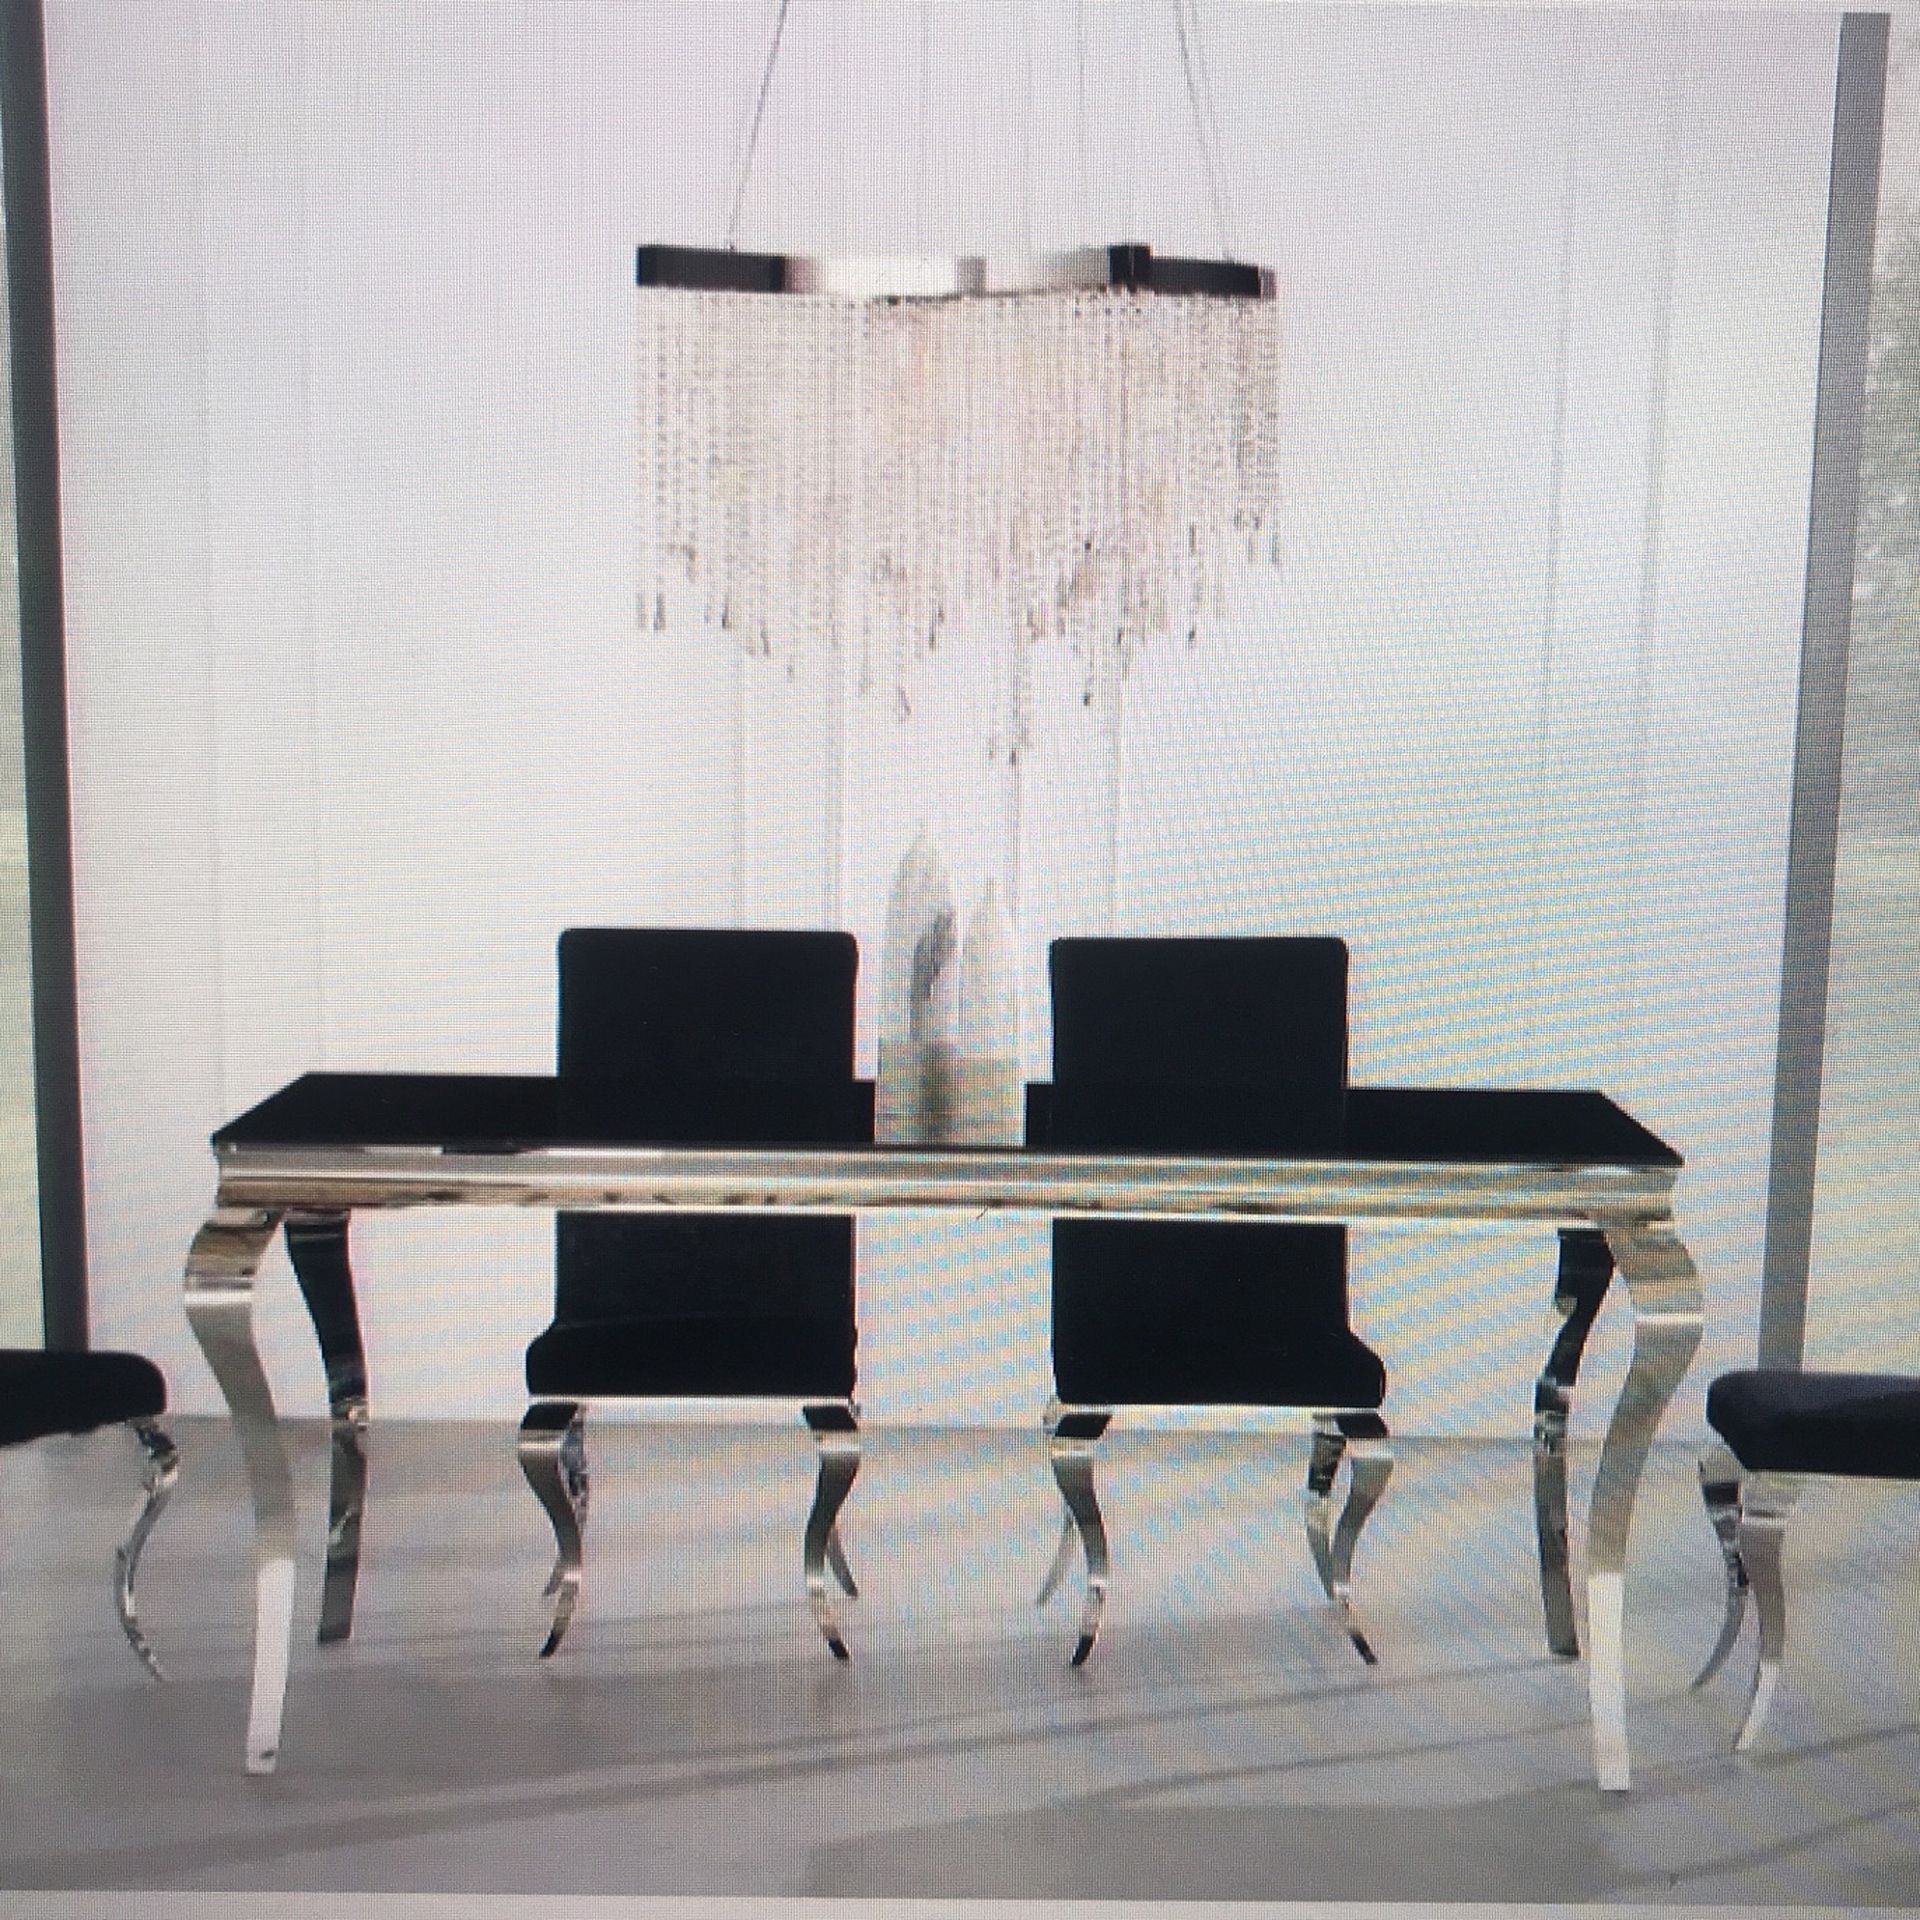 SALE $1150 DINING ROOM SET BLACK CHROME TABLE + 4 CHAIRS